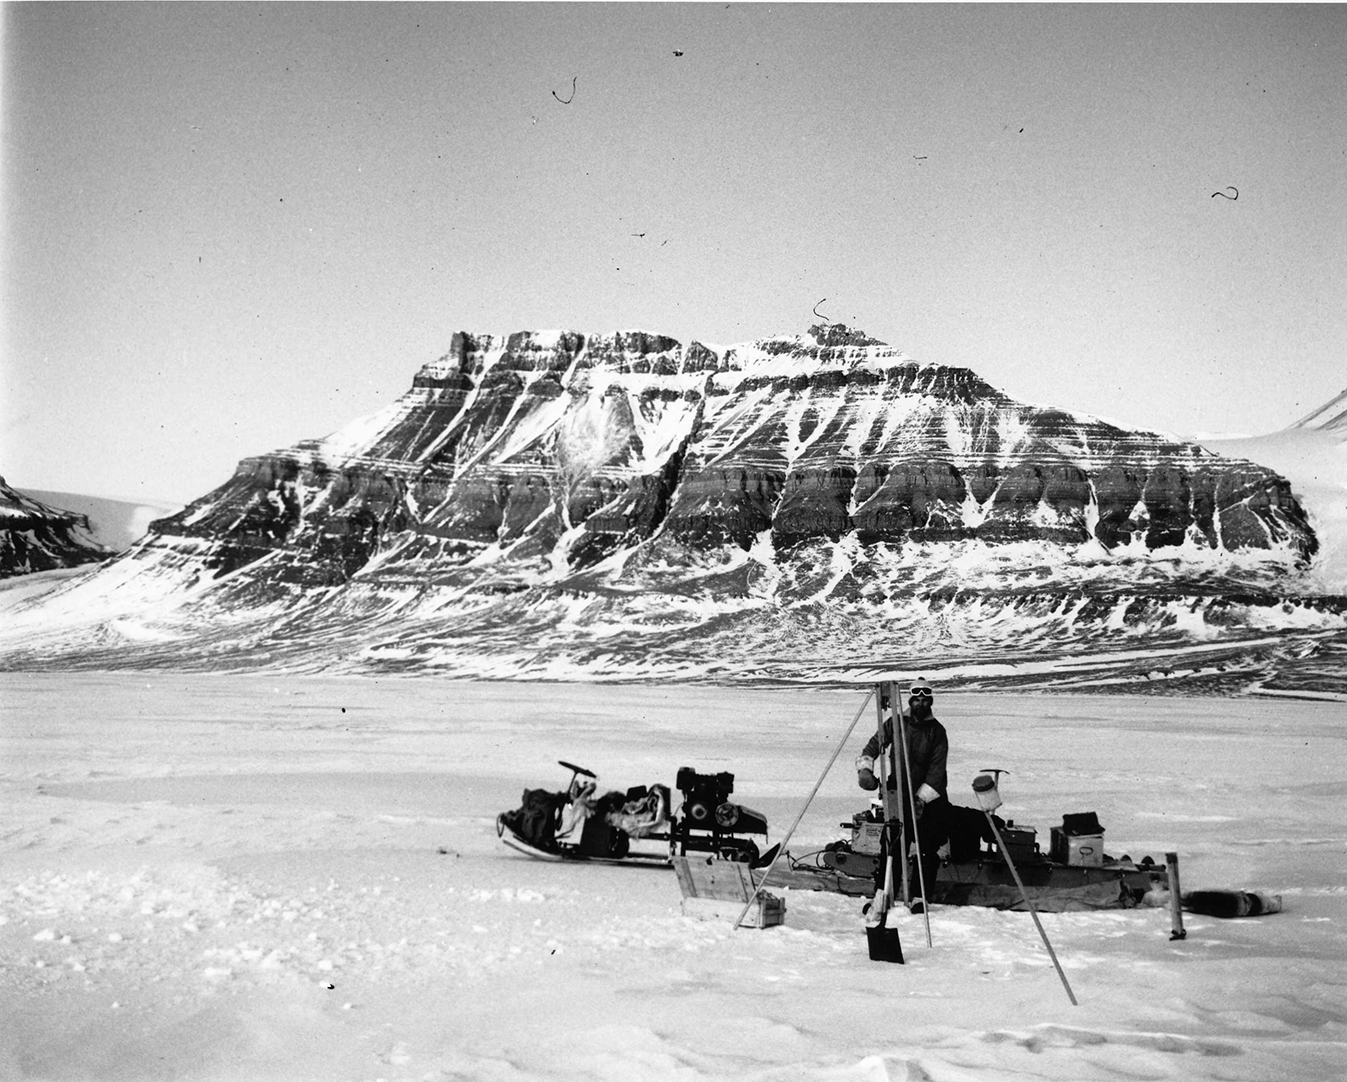 Defence Research and Development Canada (DRDC) has been conducting research at Alert and in the High Arctic for the past 60 years. DRDC Archive